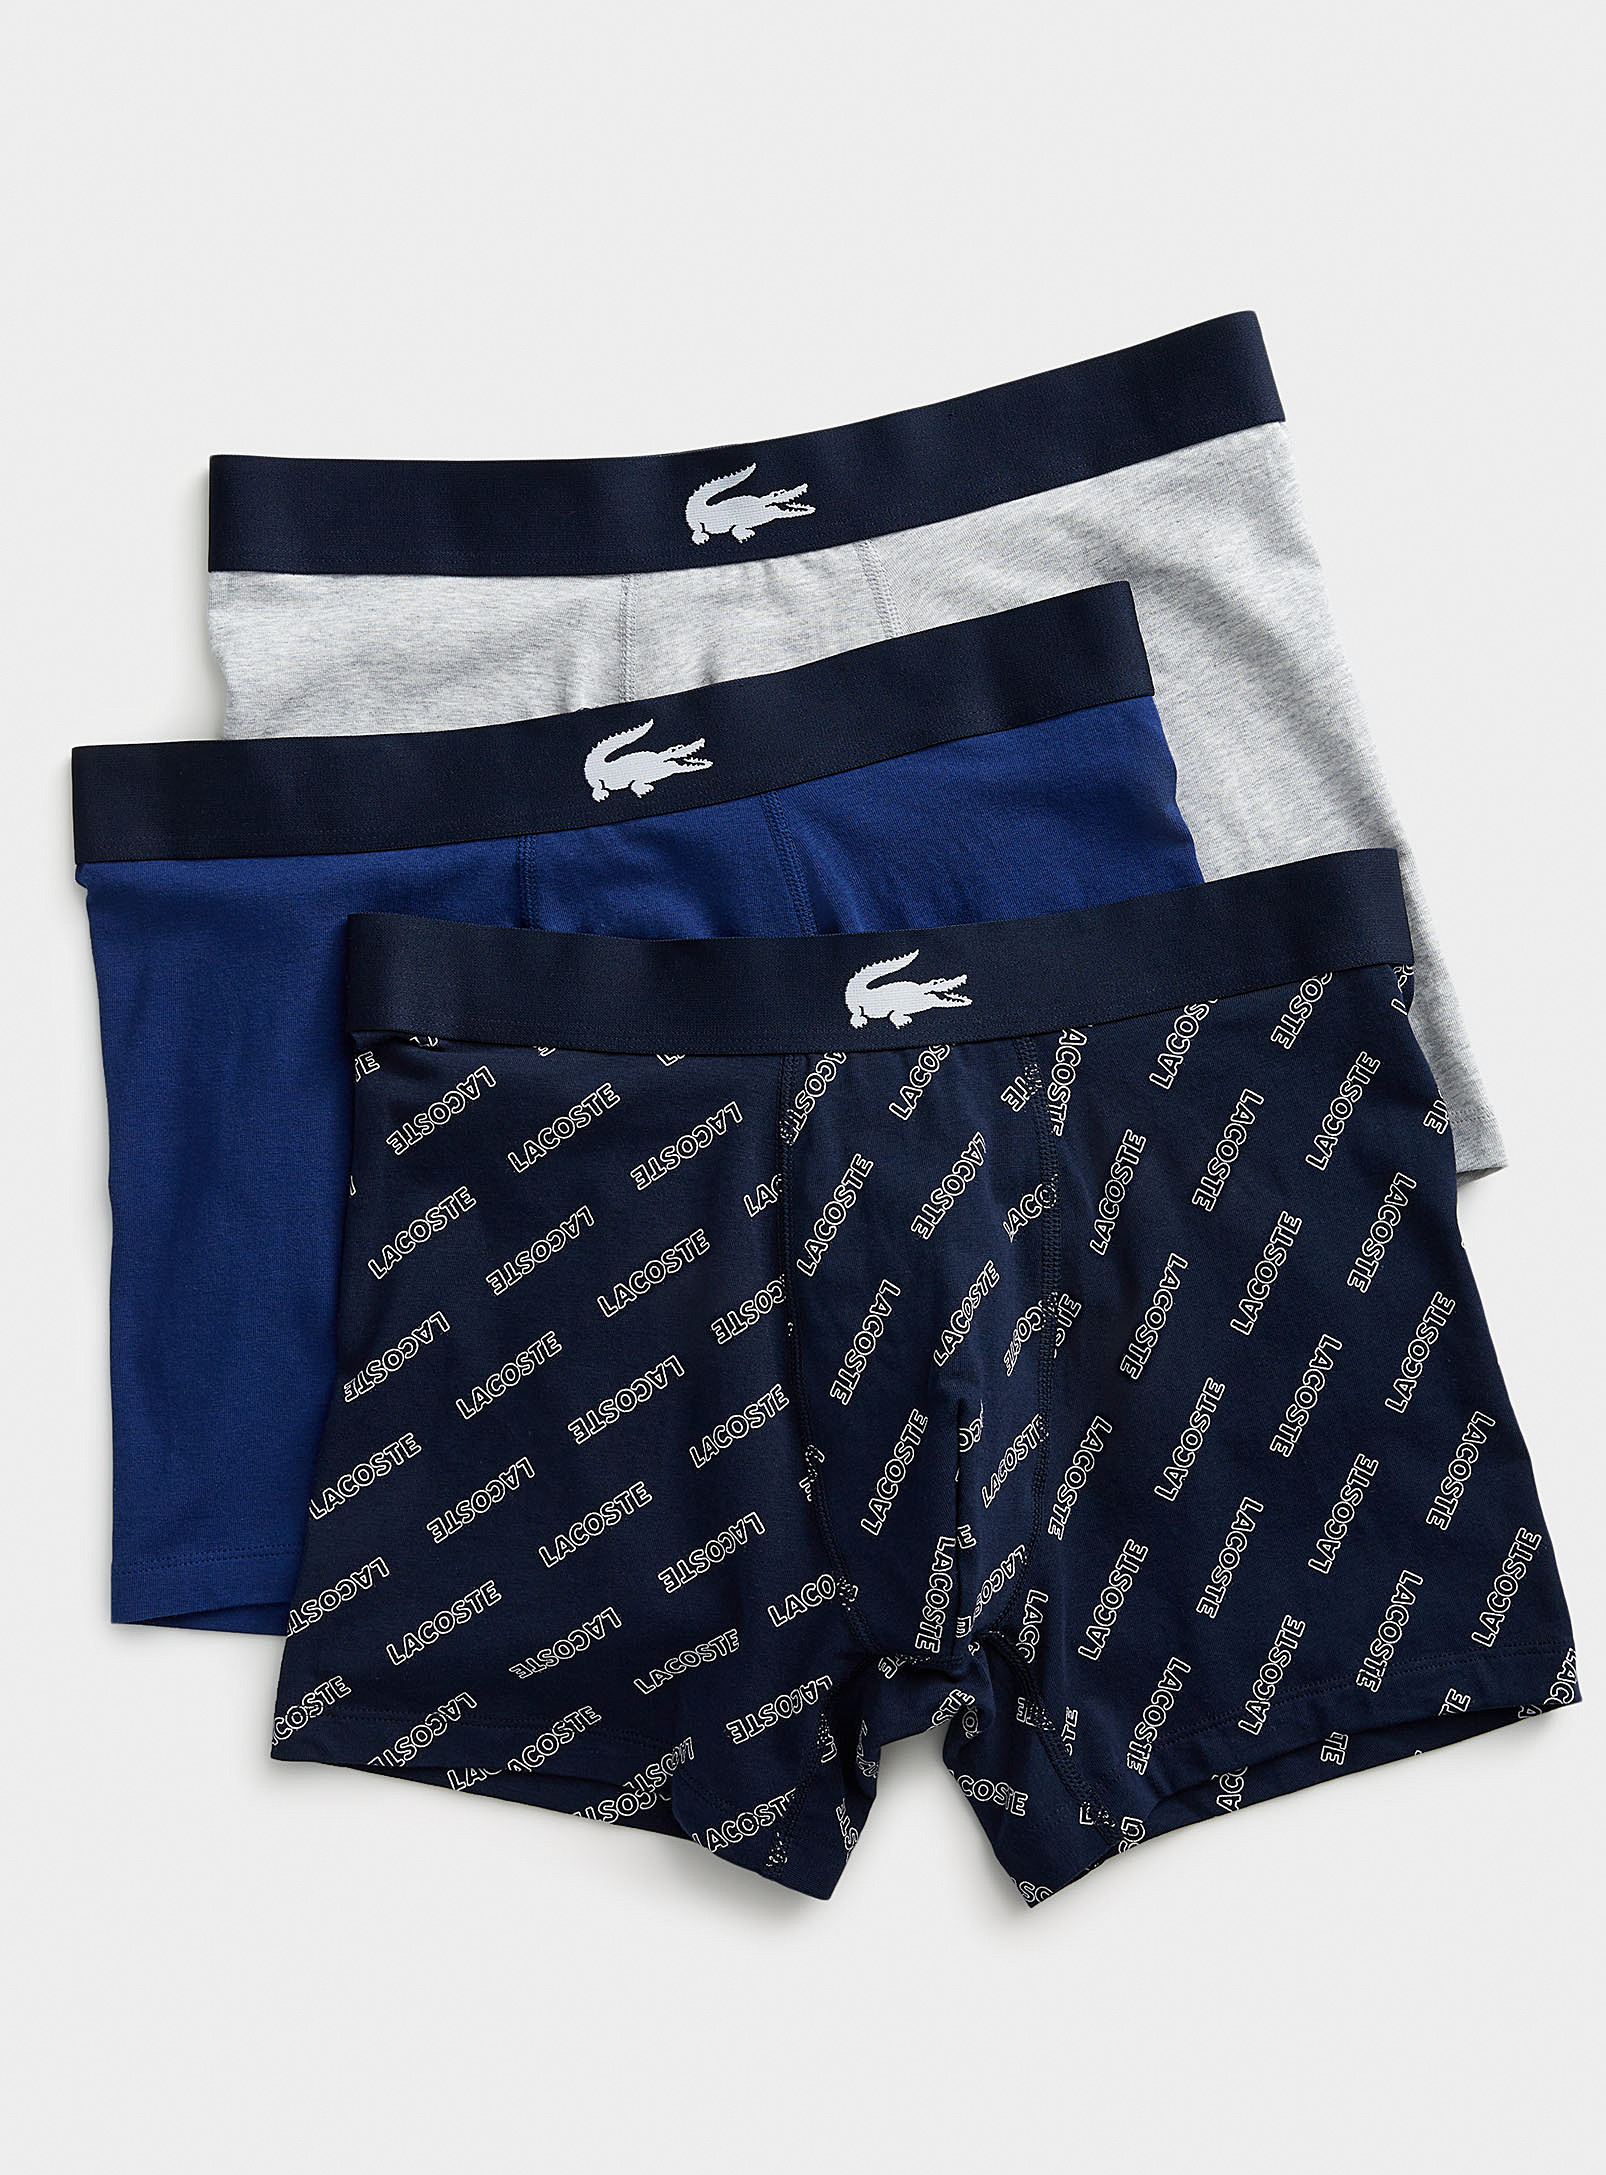 Lacoste Solid And Patterned Stretch Cotton Boxer Briefs 3-pack In Patterned Blue